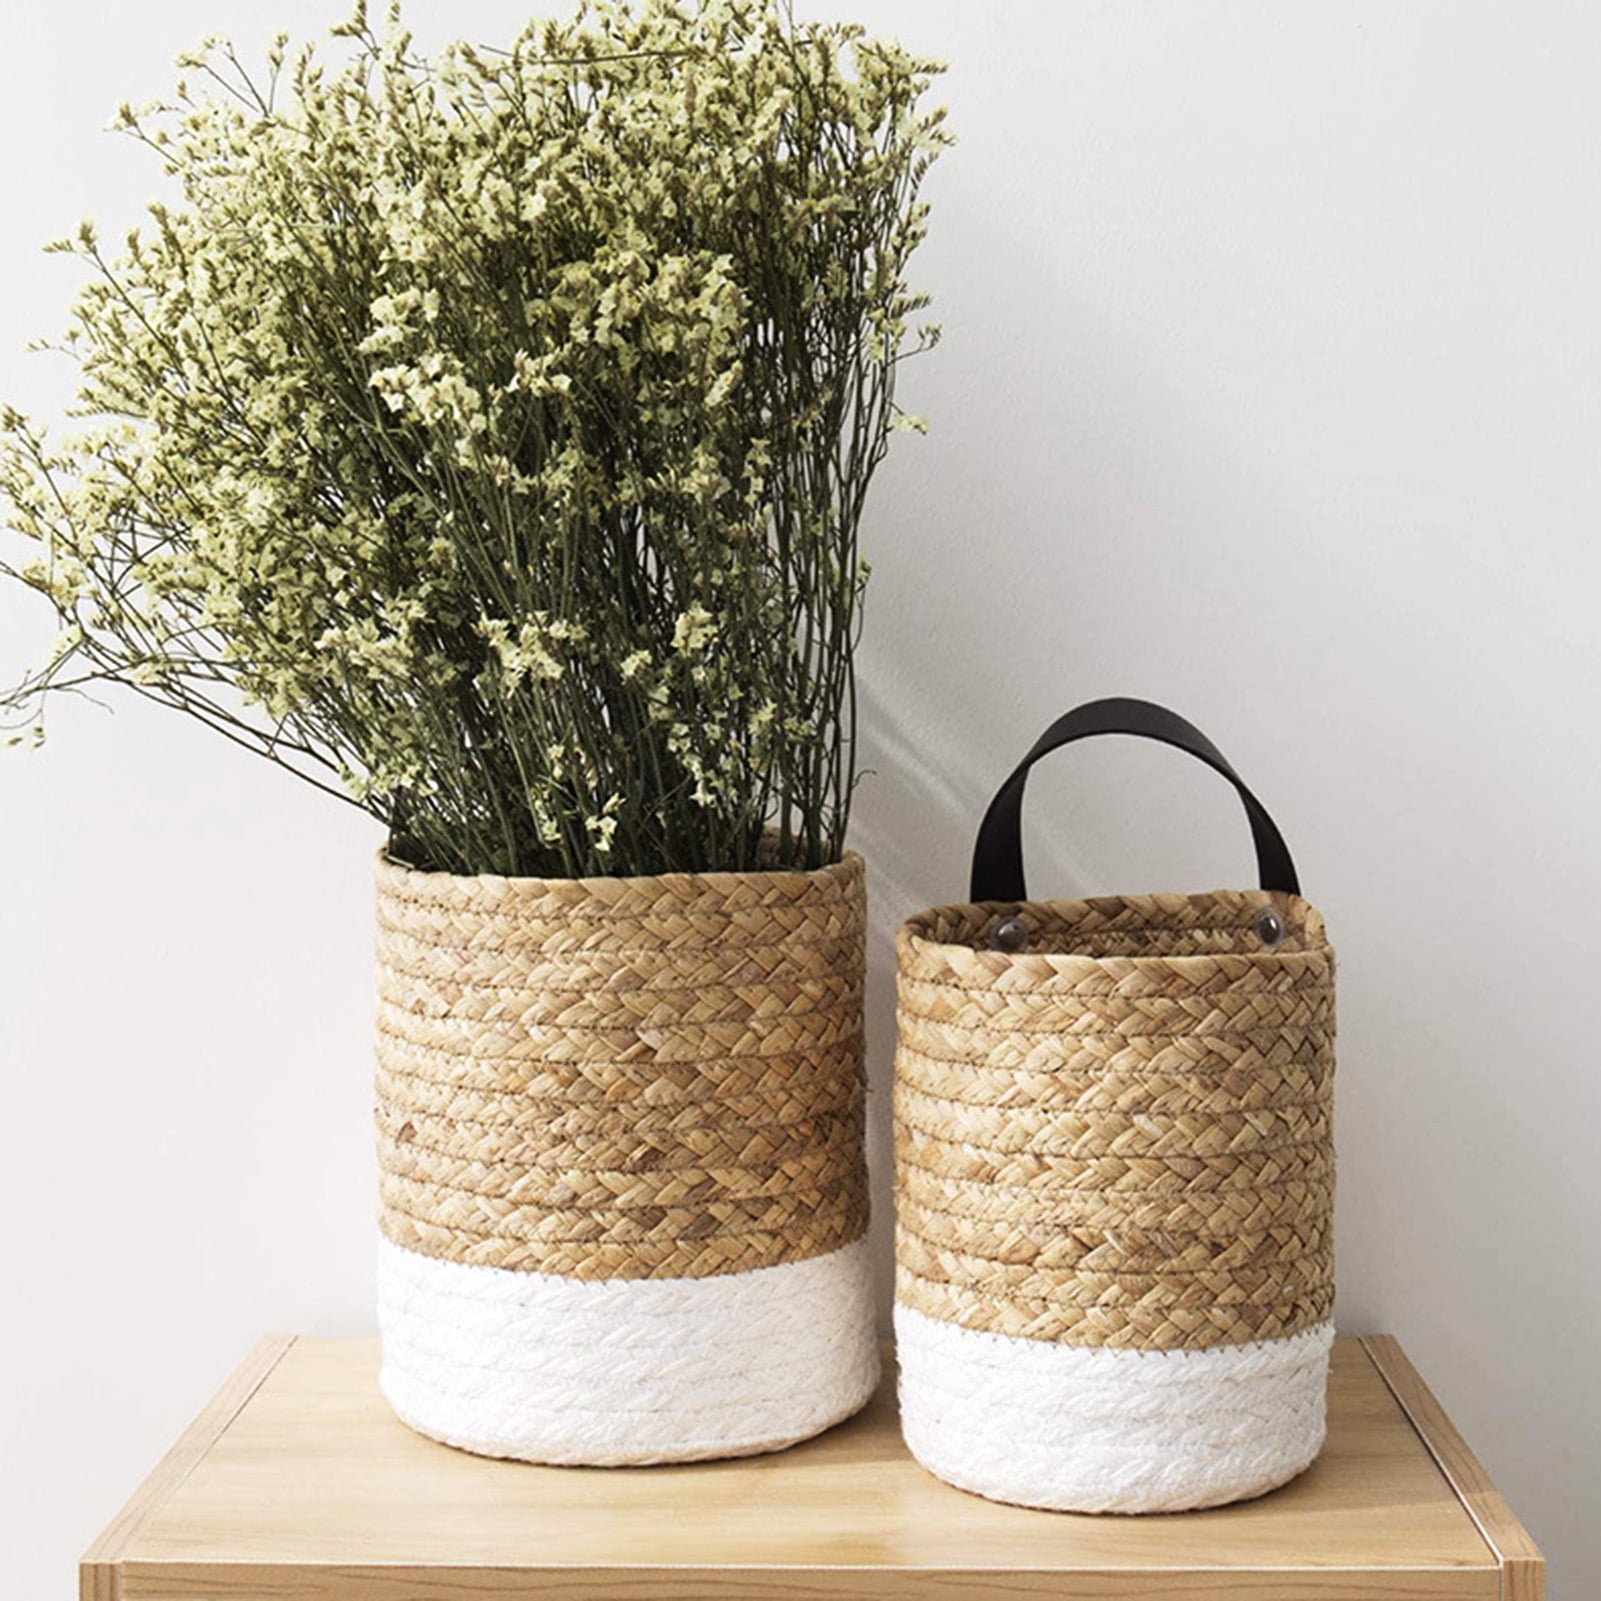 2PCS Wall Hanging Organizer Storage Baskets Set with Free Wall Hooks,Small  Cotton Rope Baskets for Baby Nursery and Home Décor